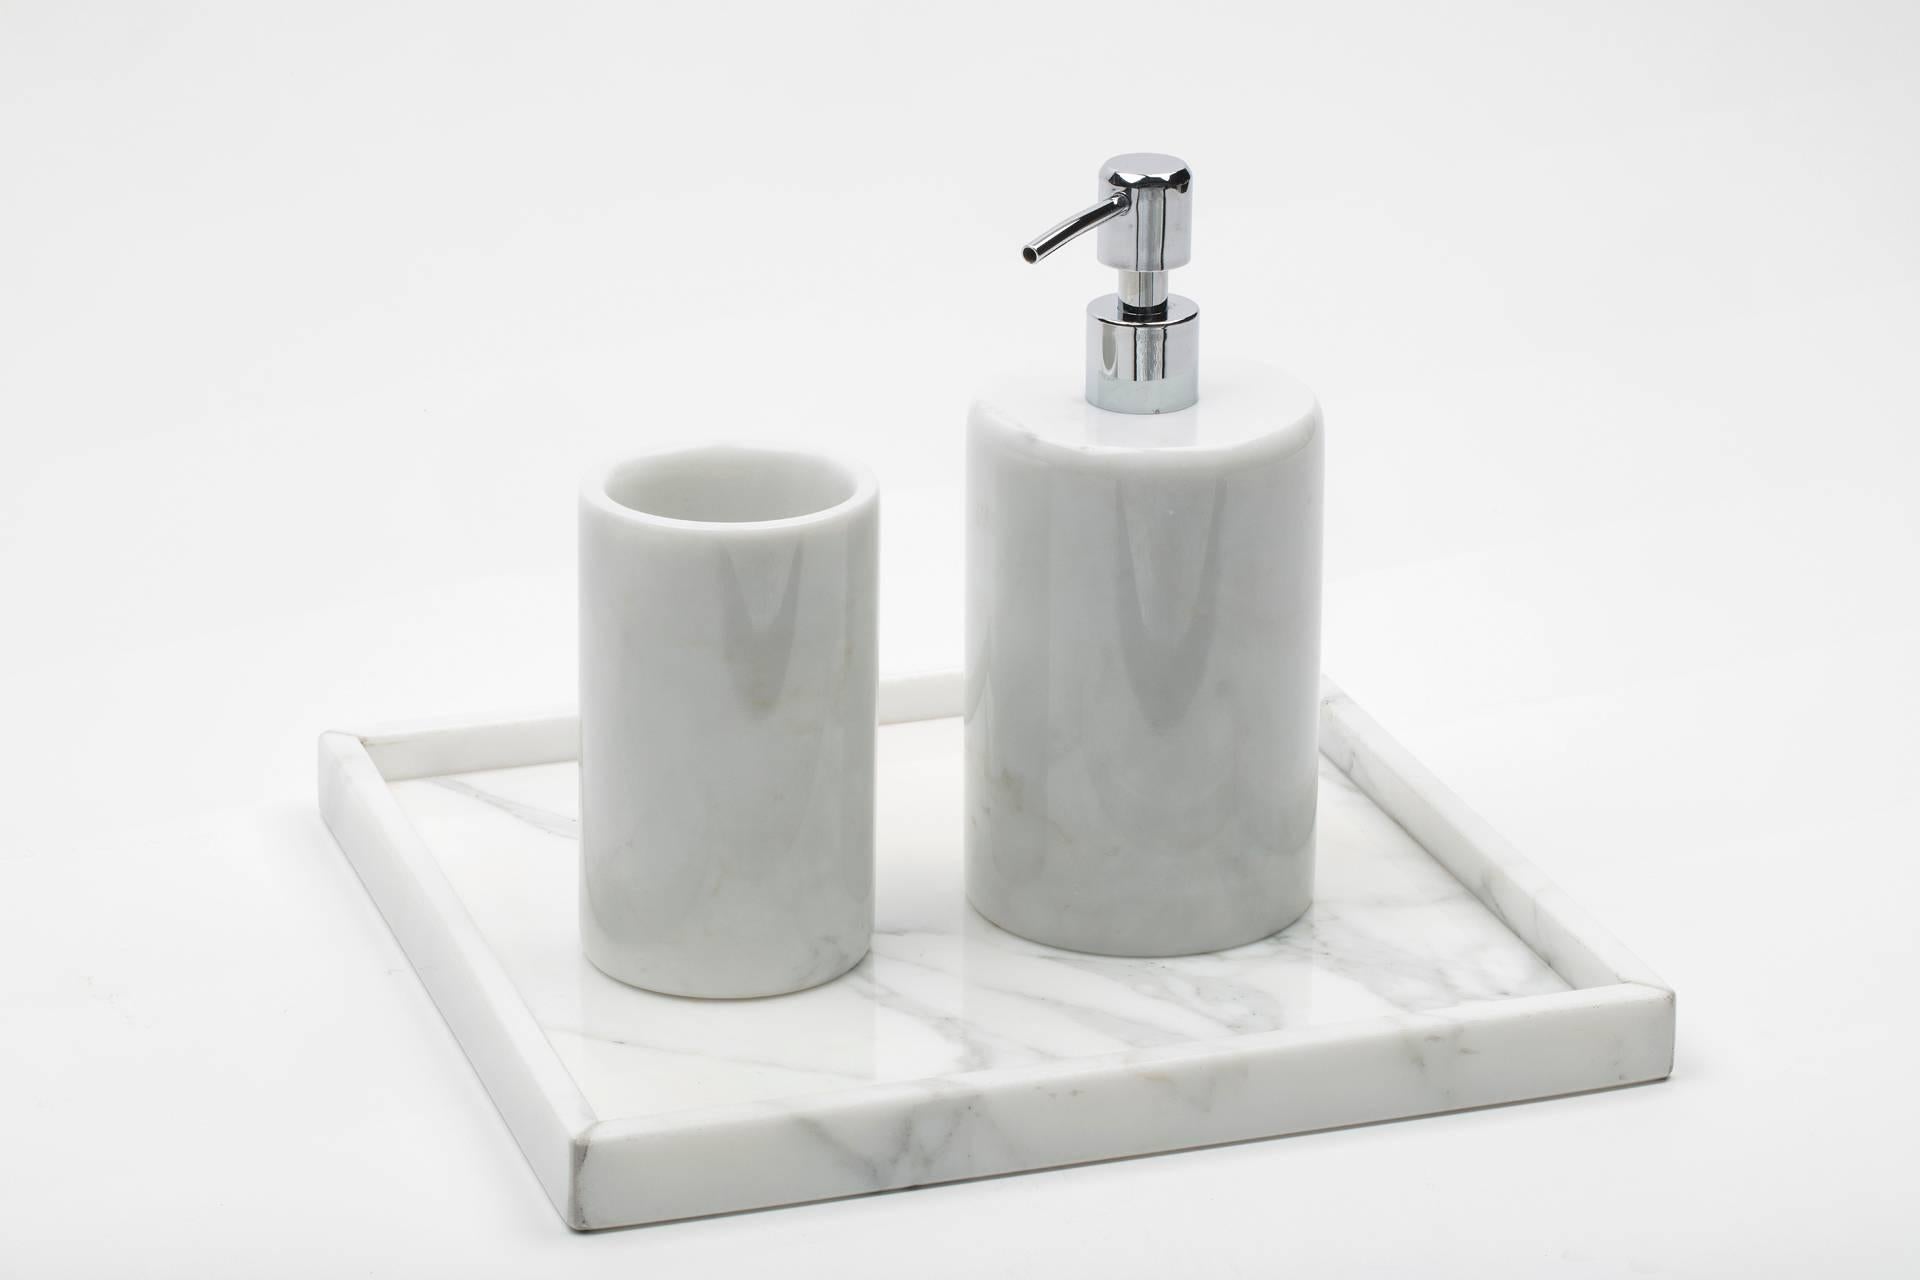 Squared white Carrara marble tray, ideal for spa, in the bathroom but also as a table centrepiece or in the entrance as a dresser valet. Each piece is in a way unique (every marble block is different in veins and shades) and handmade by Italian